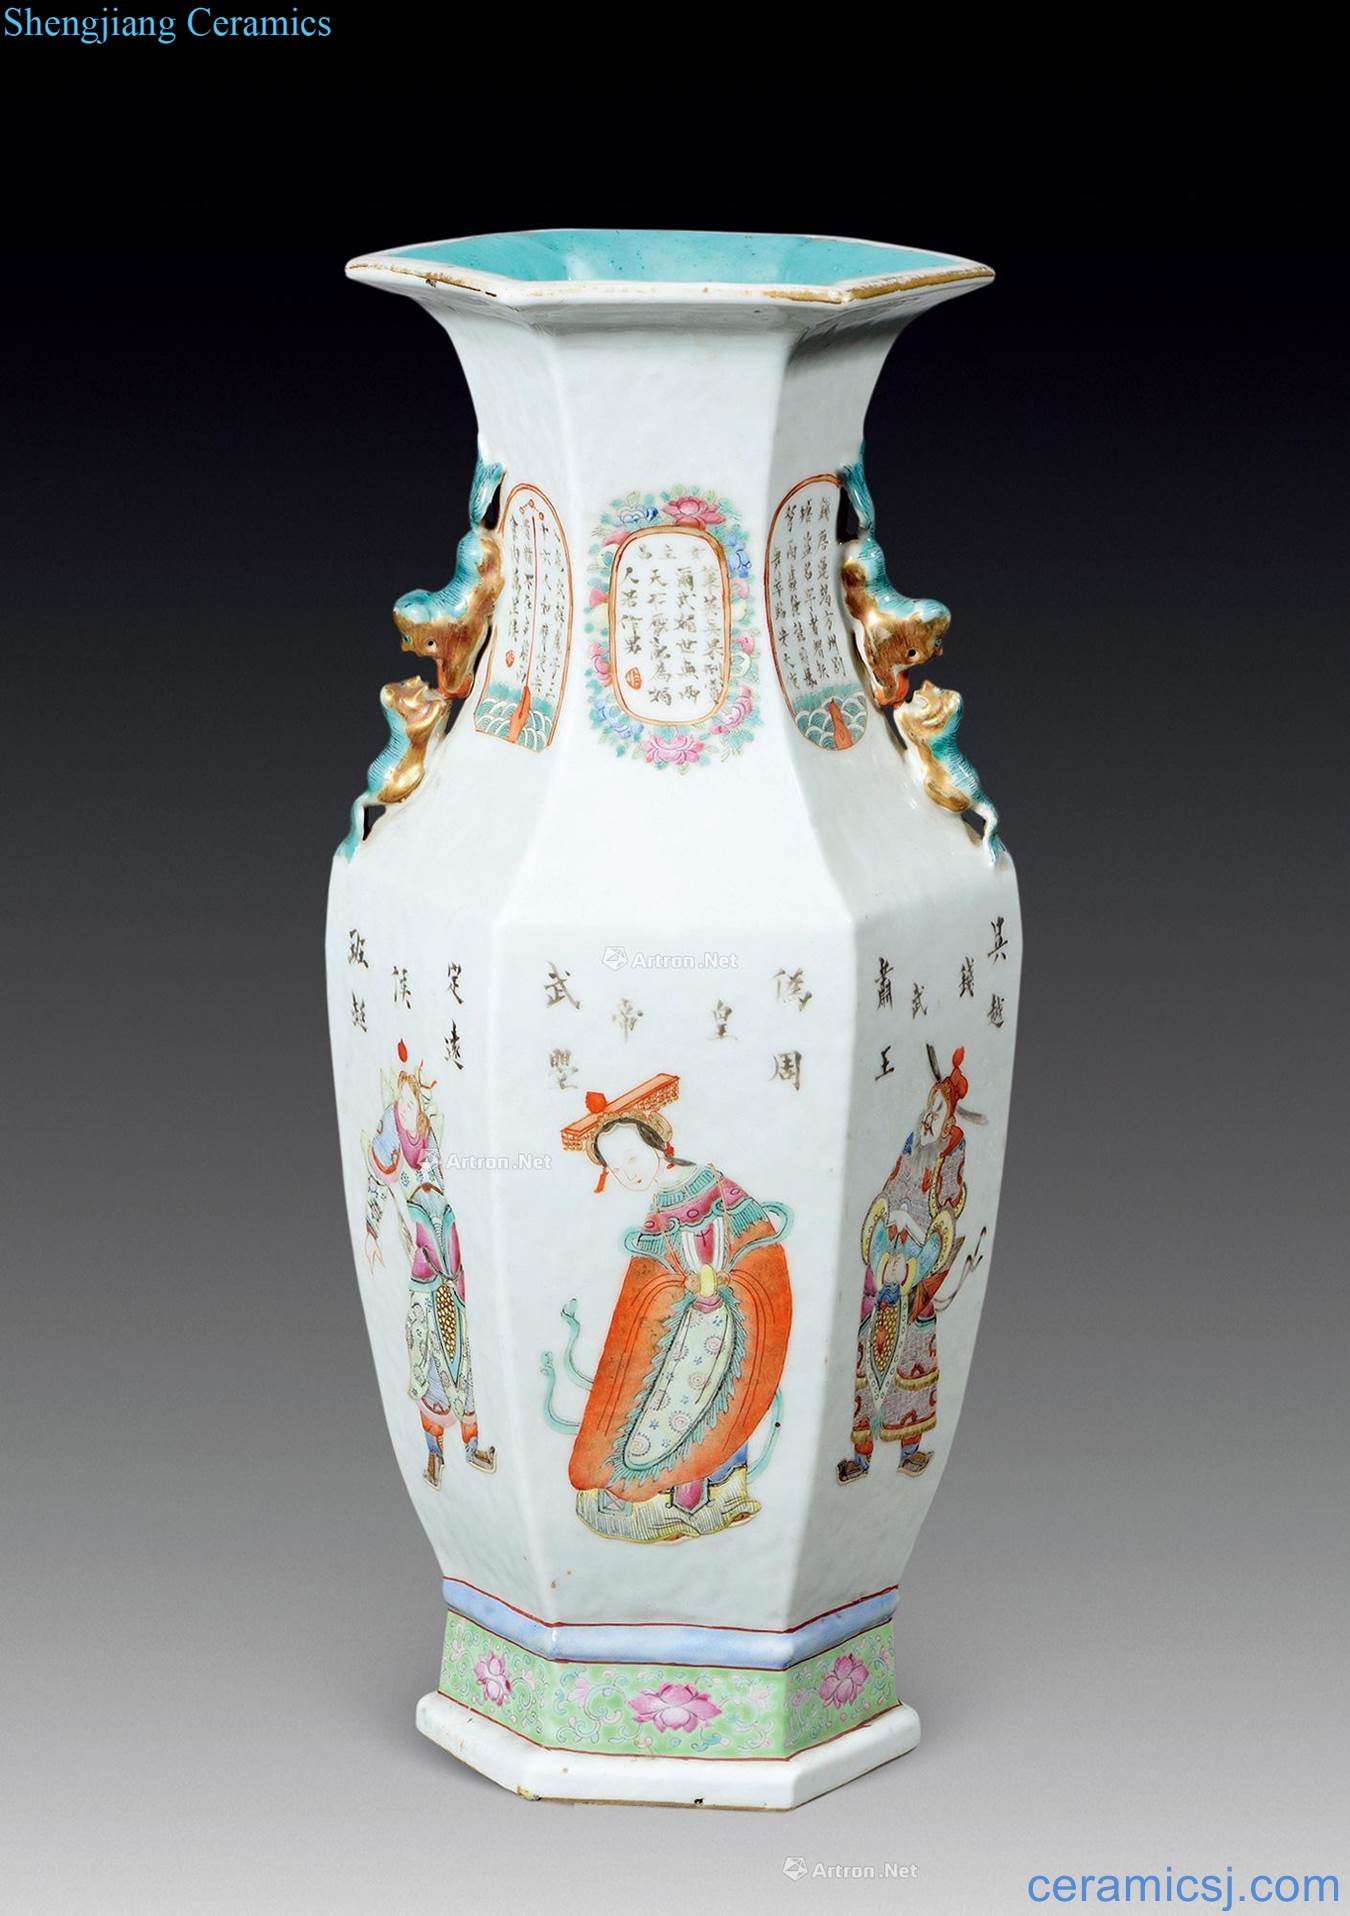 Qing dynasty vase pastel unique spectral characters